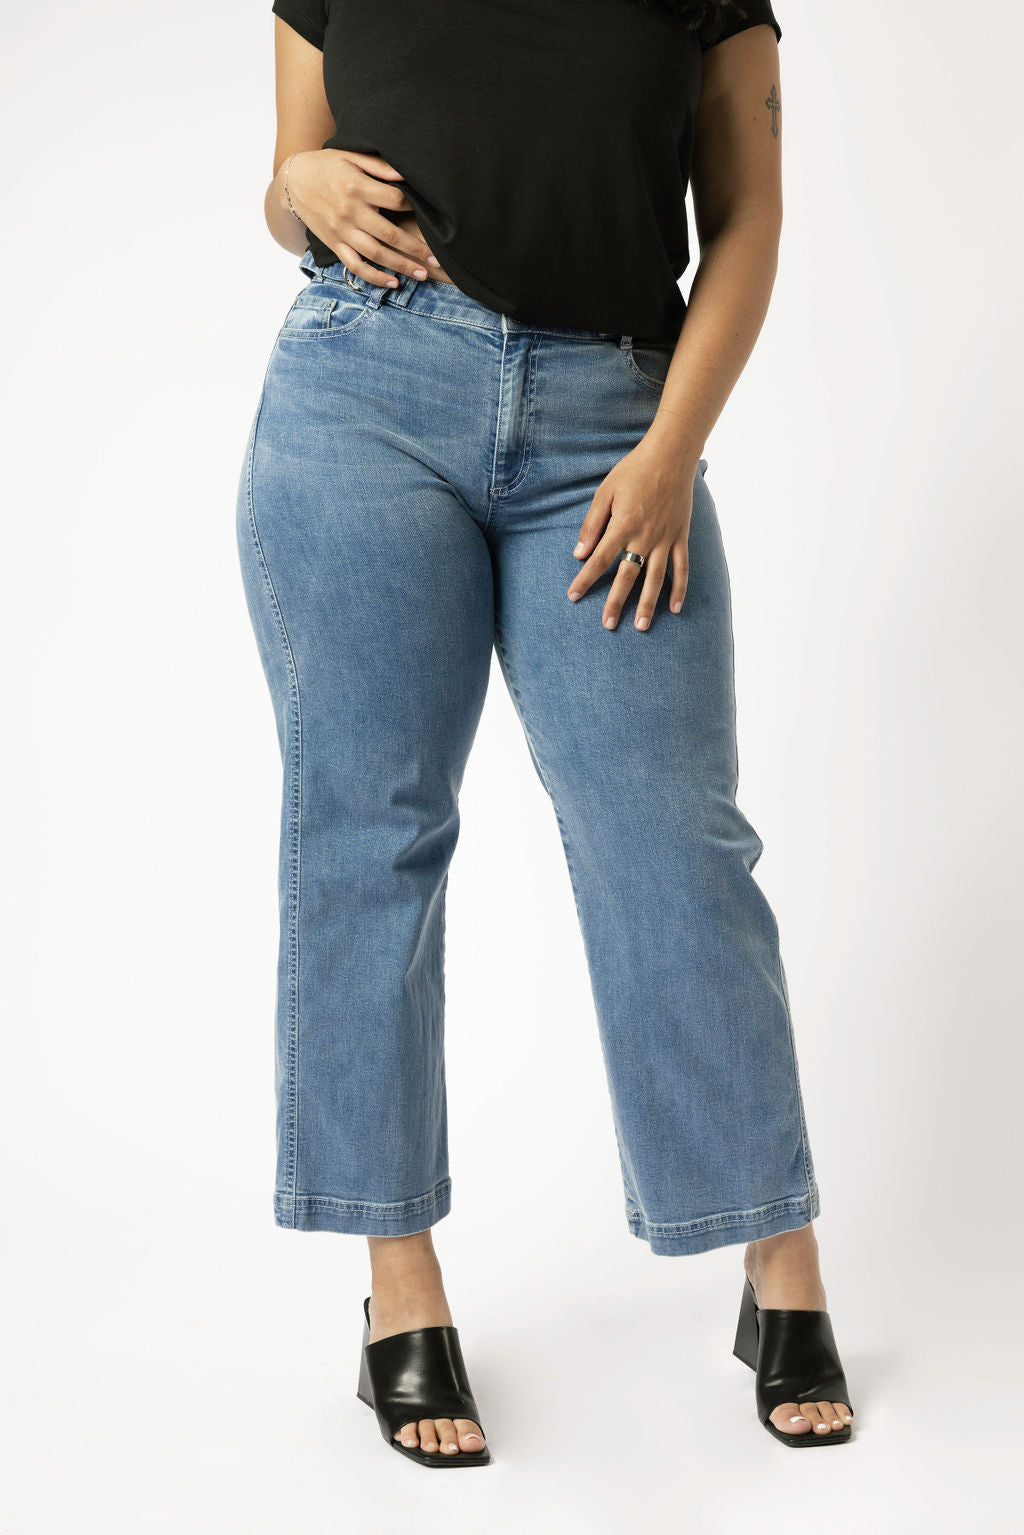 Minimalist Capsule Wardrobe High Waisted, Relax Fit, Wide Leg Jeans